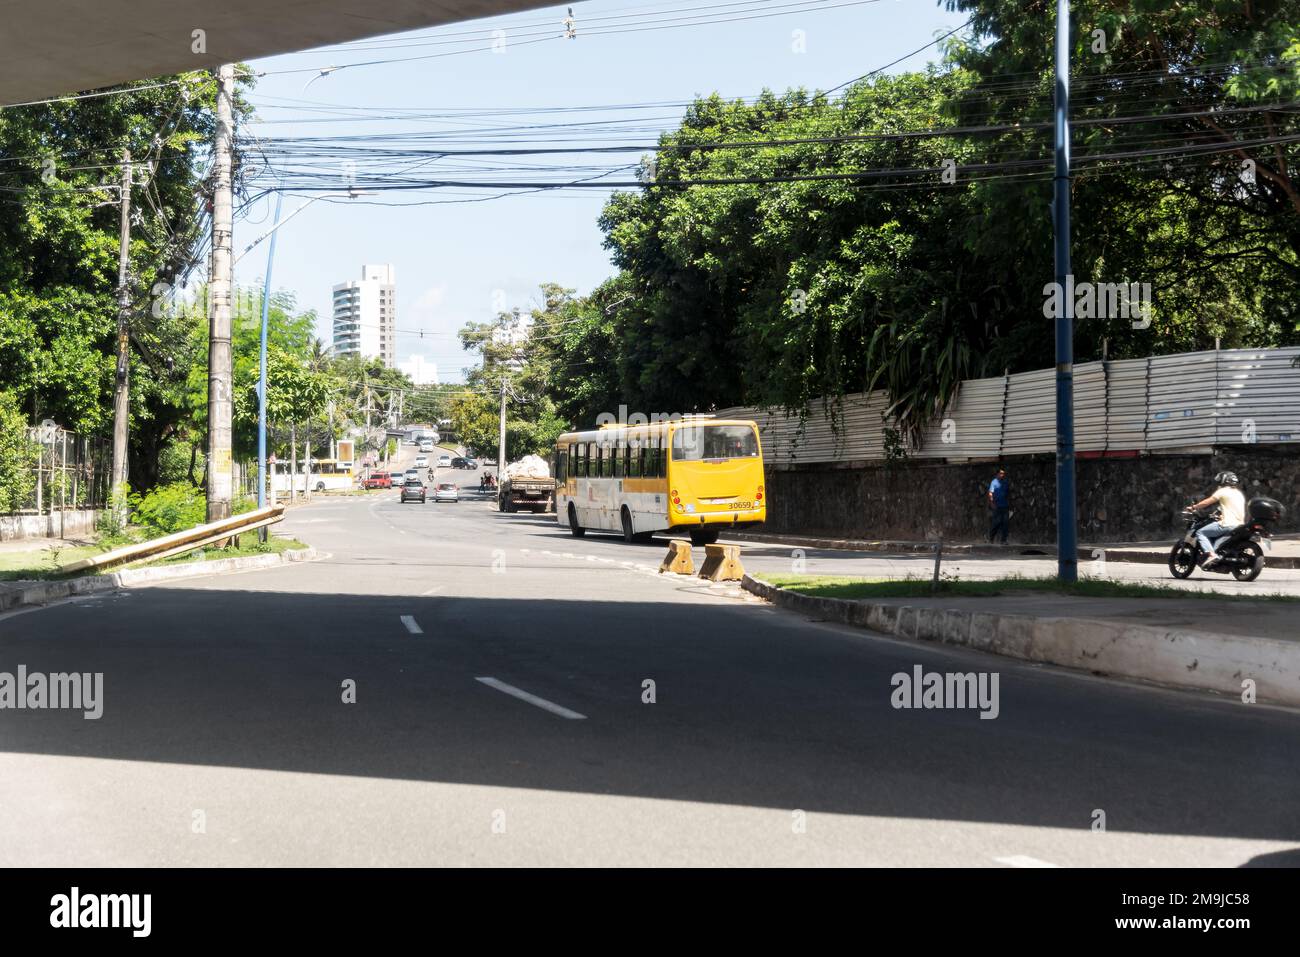 Movement of vehicles in traffic in Salvador, on a bright sunny day. Stock Photo